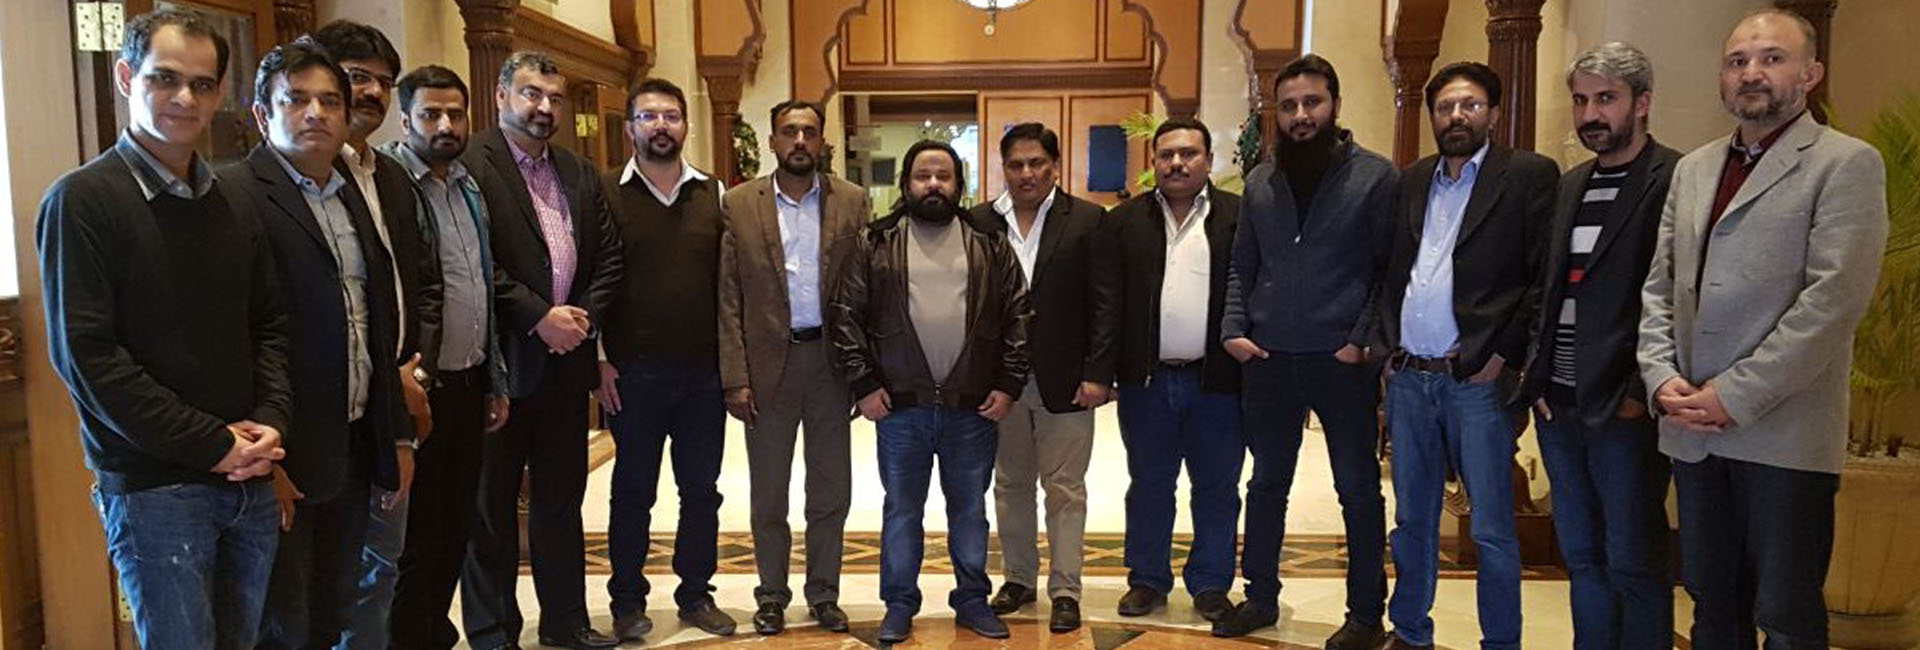 Lunch with Managers of WorldCall Telecom at Avari Hotel Lahore